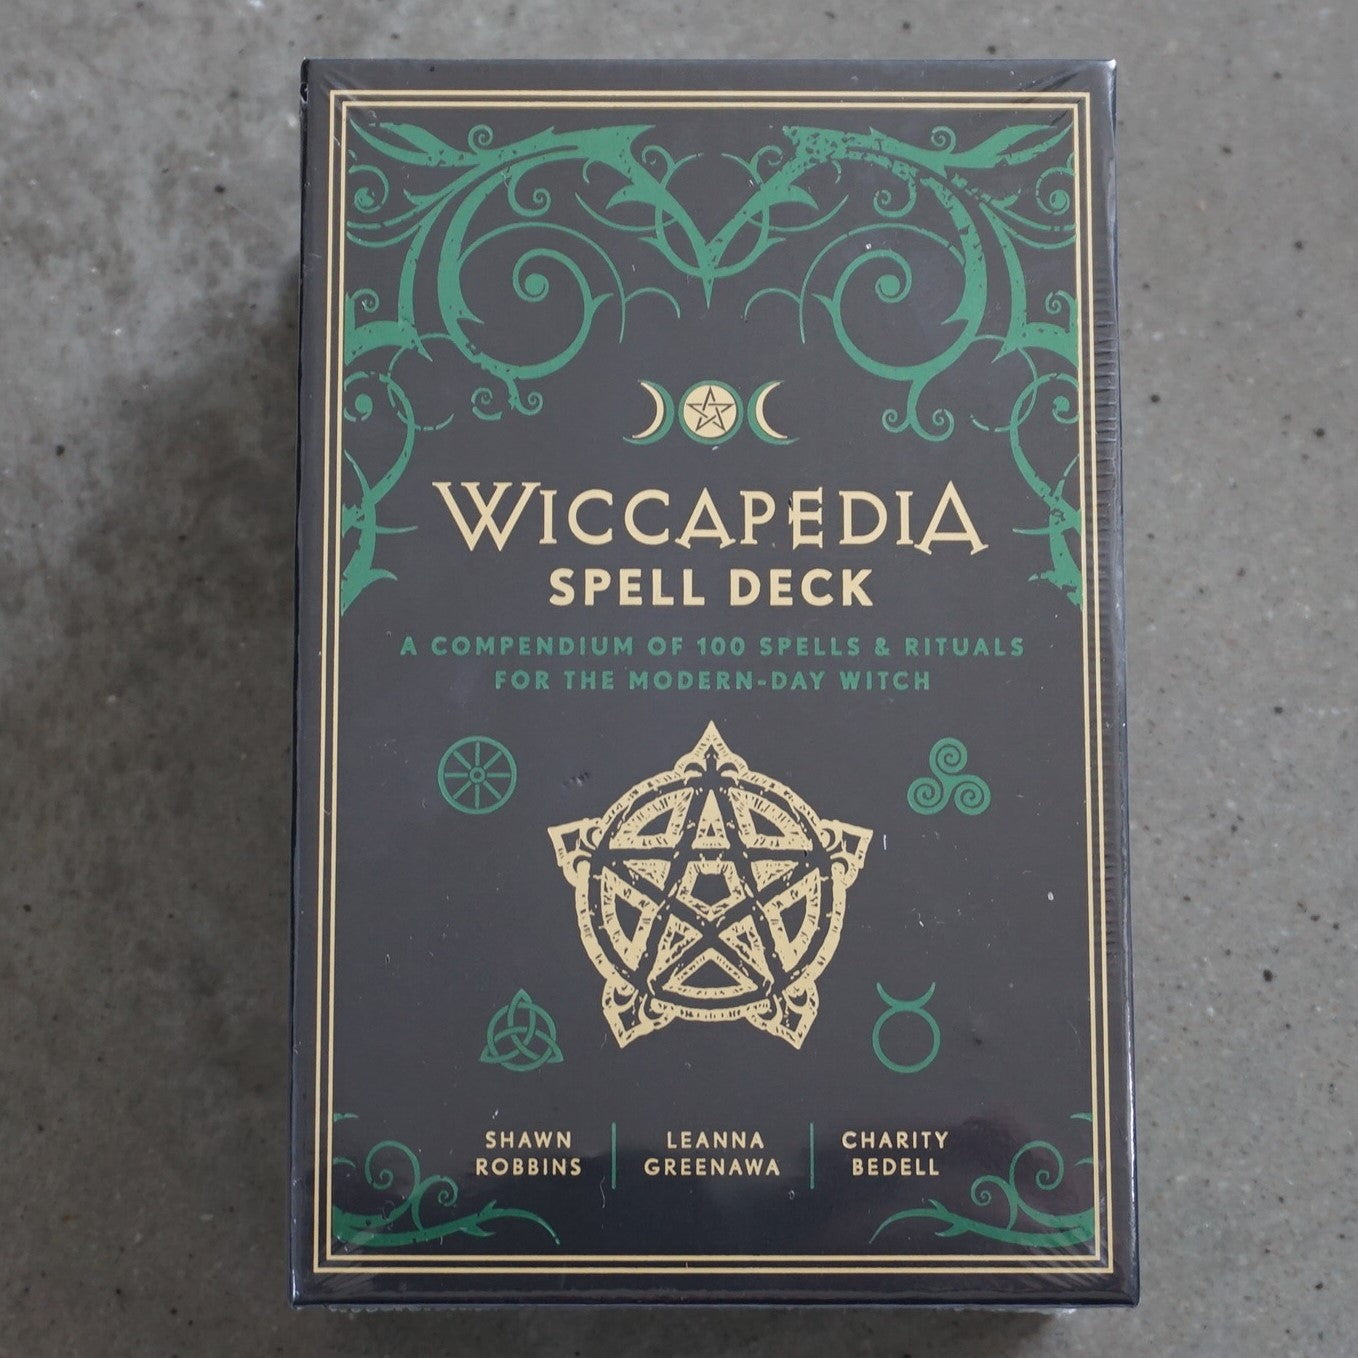 Wiccapedia Spell Deck.